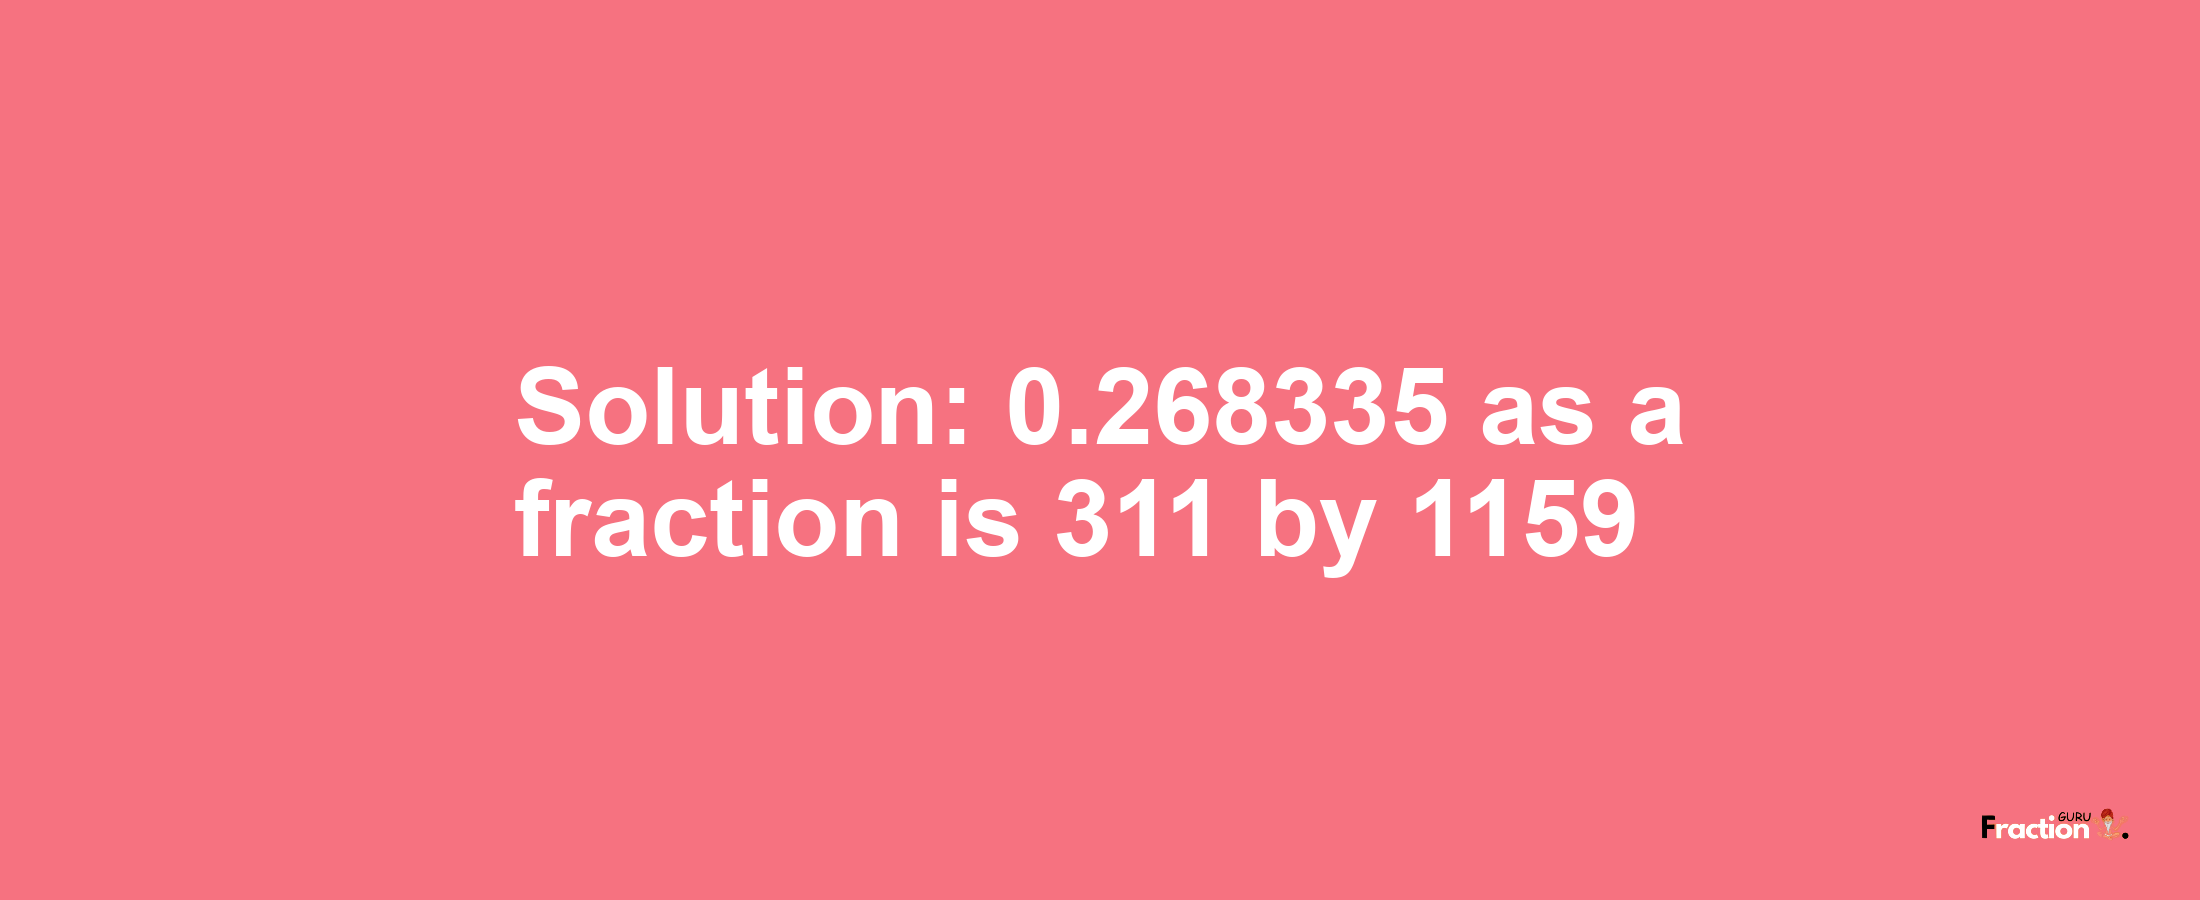 Solution:0.268335 as a fraction is 311/1159